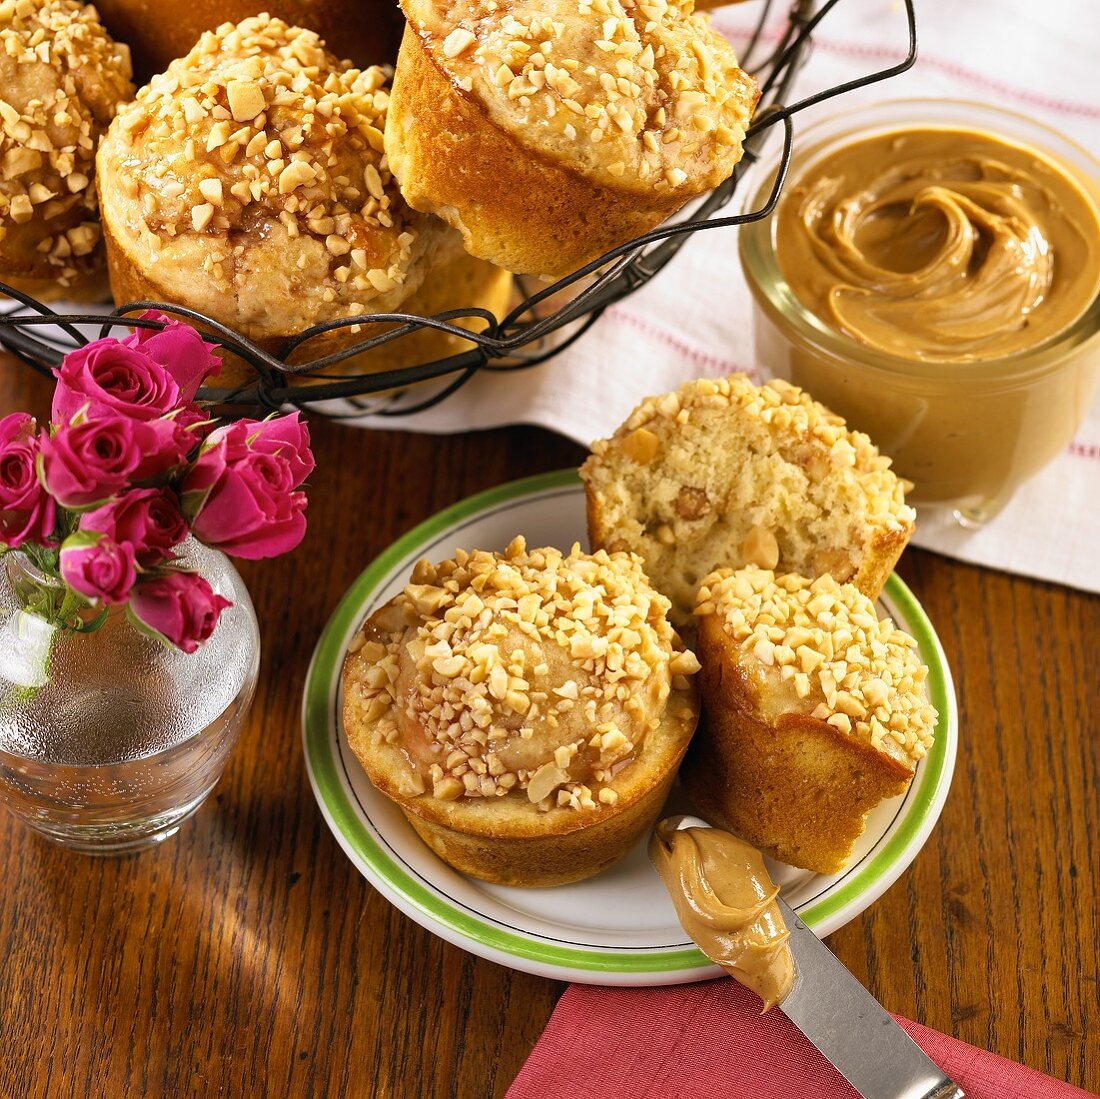 Peanut Butter Muffins on a Plate and in a Wire Basket